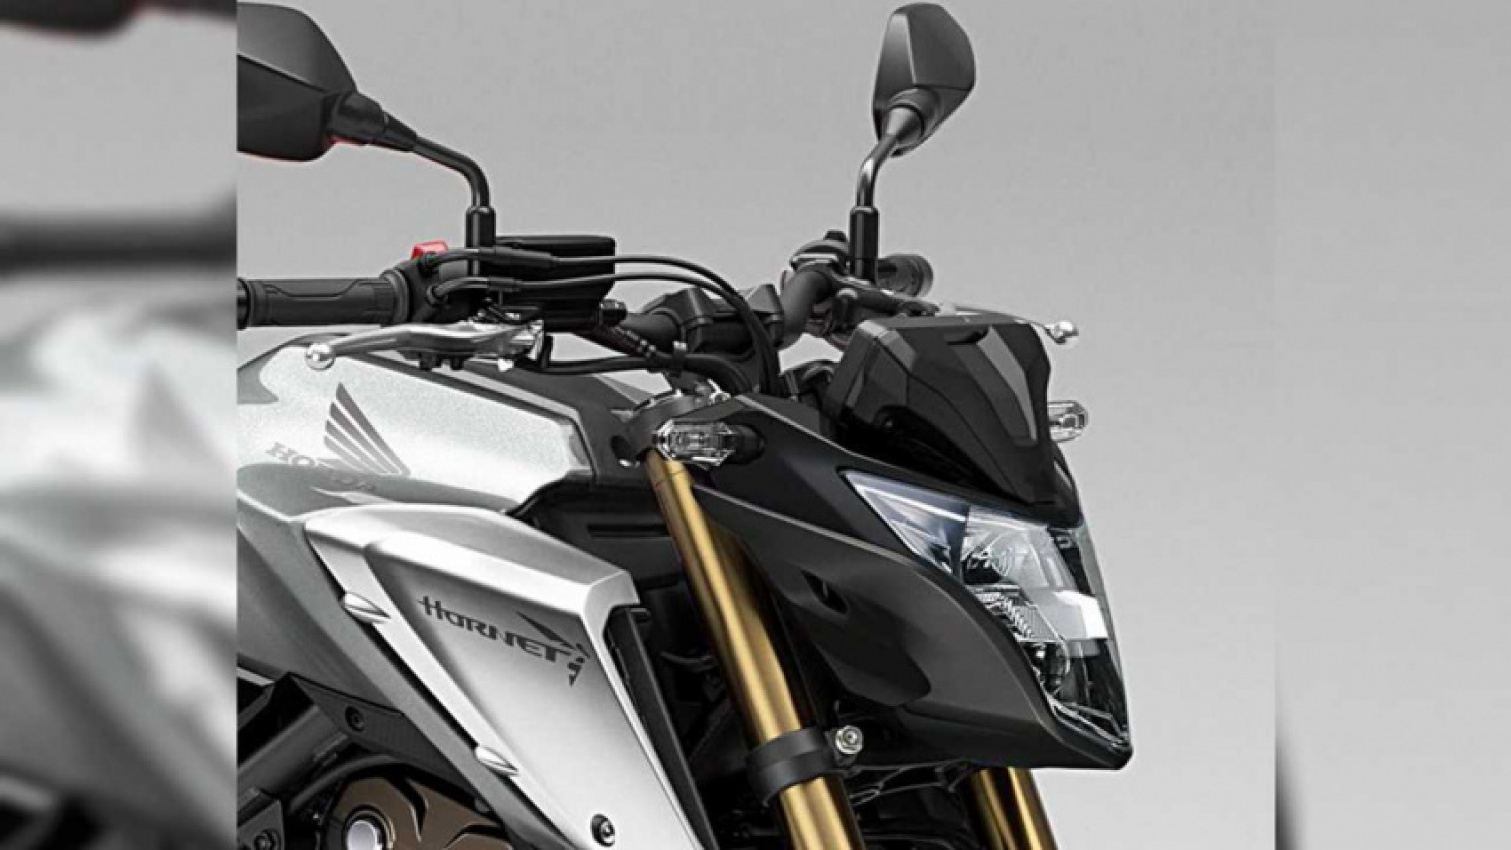 autos, cars, honda, could the honda hornet concept from eicma 2021 look like this?